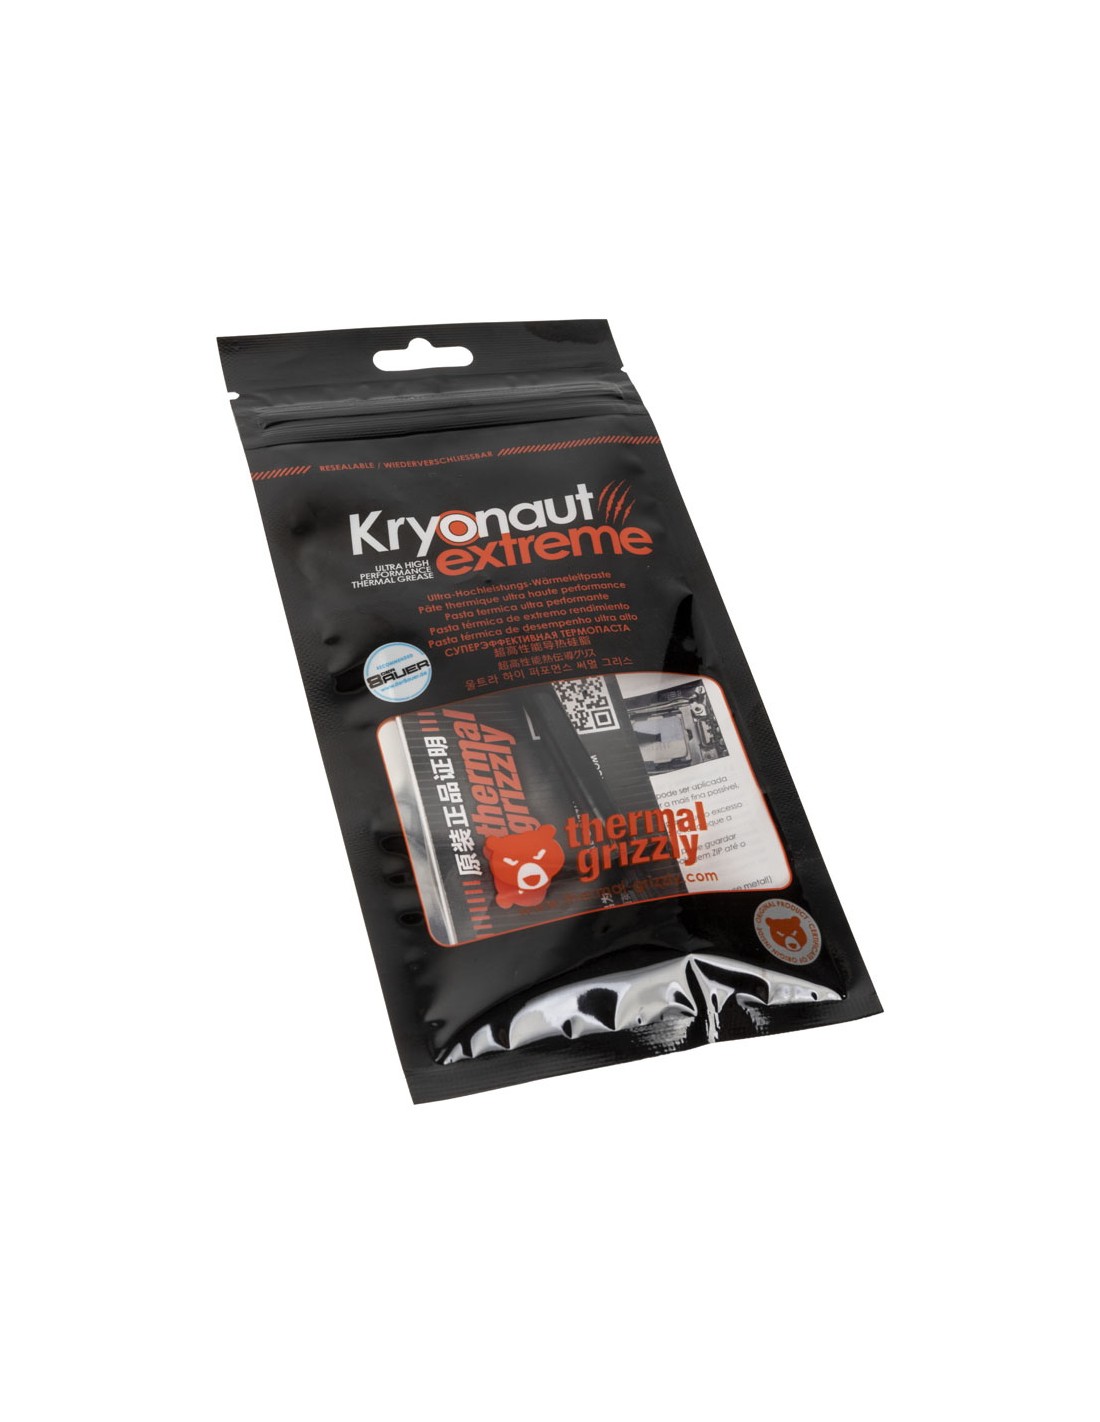 Thermal Grizzly Kryonaut Extreme - 2 Gramm